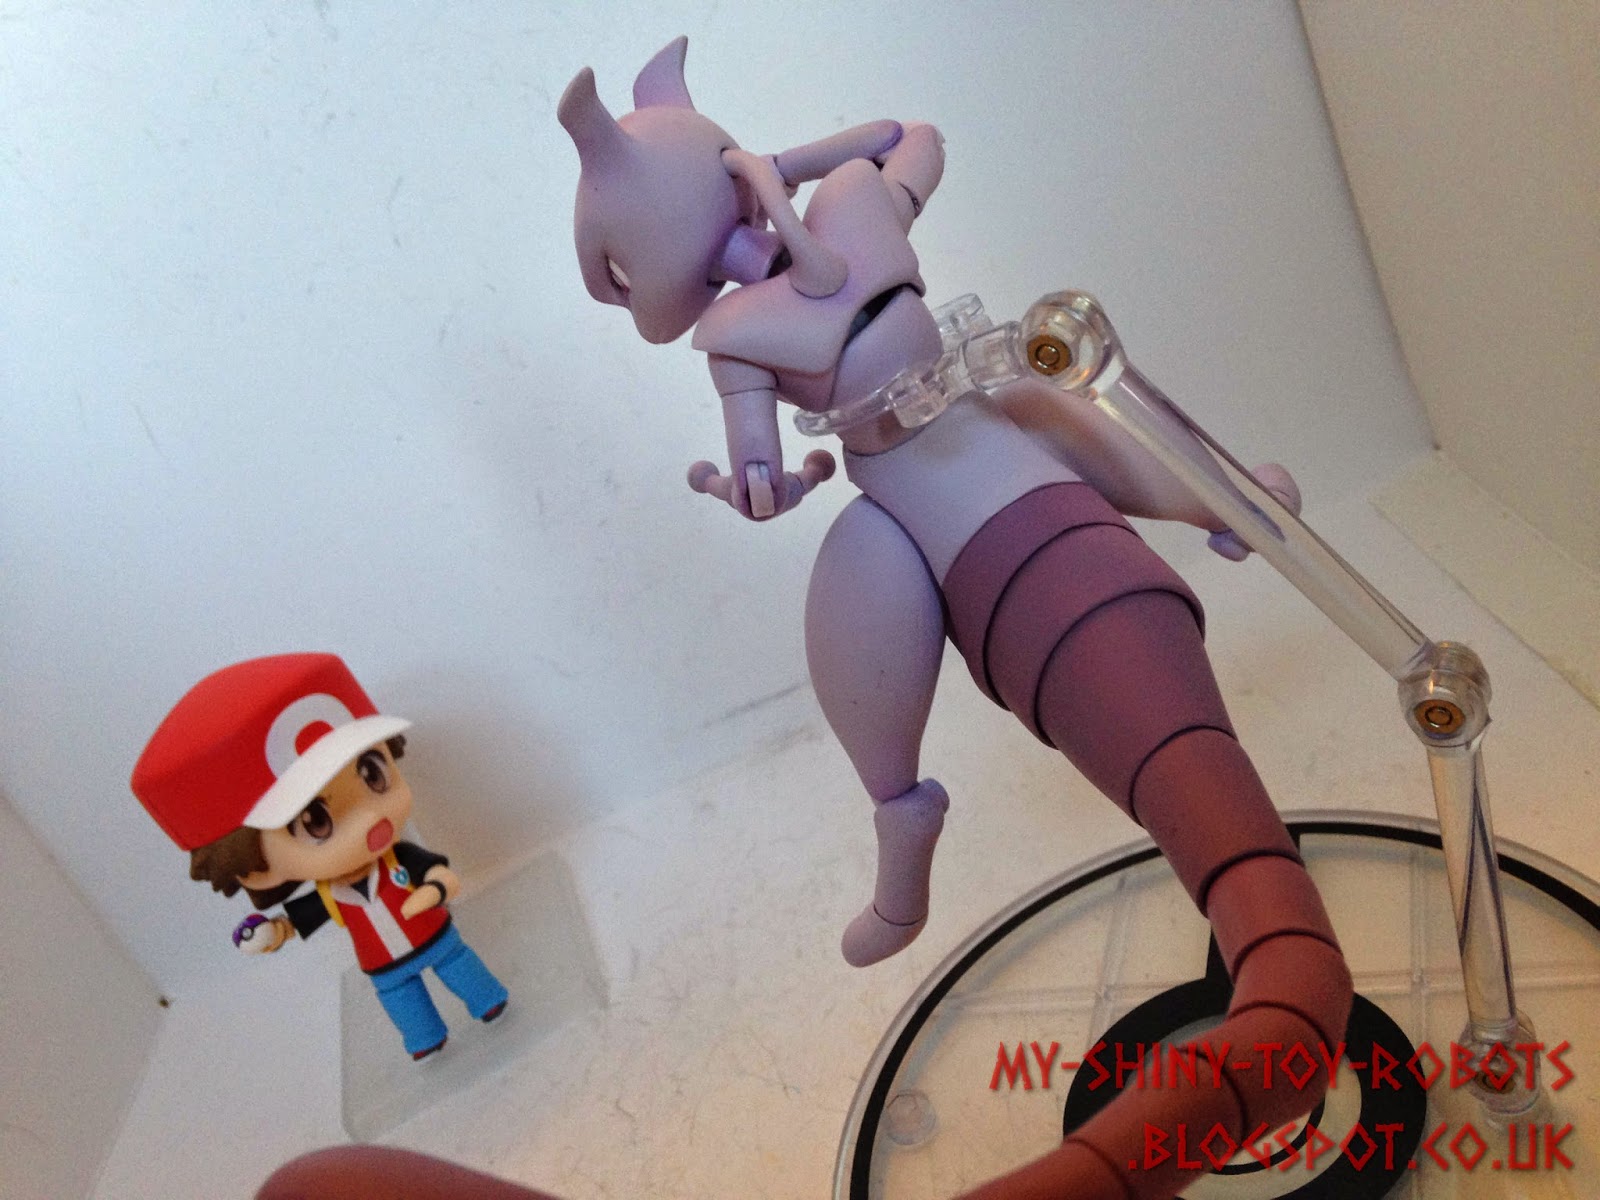 Red vs Mewtwo